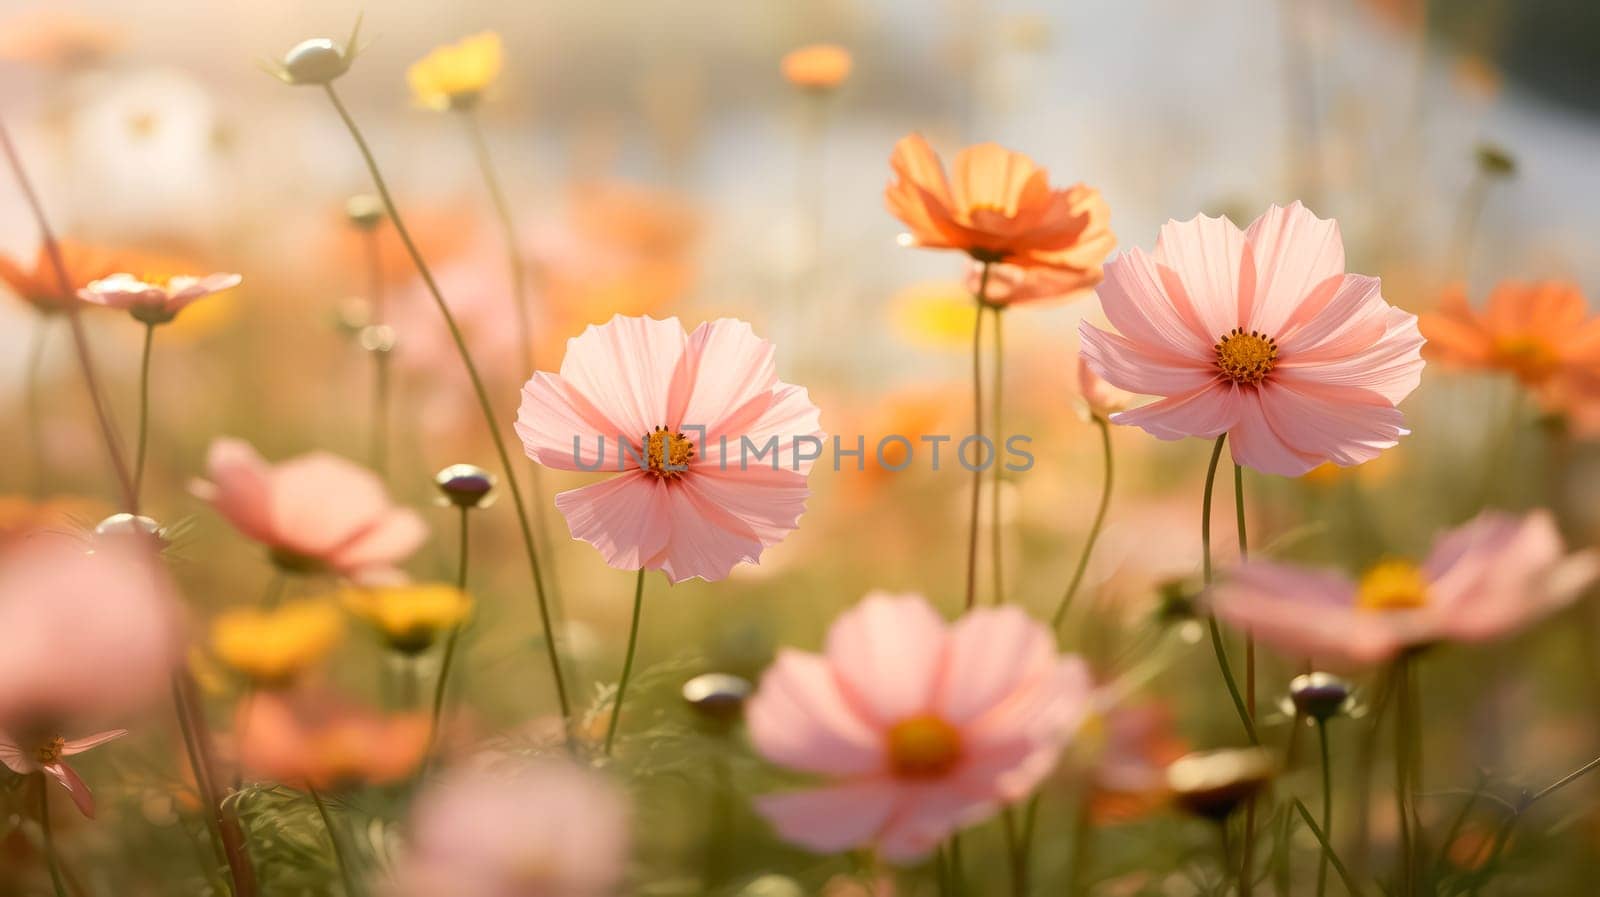 Vibrant cosmos flowers bloom gracefully in the garden by Alla_Morozova93